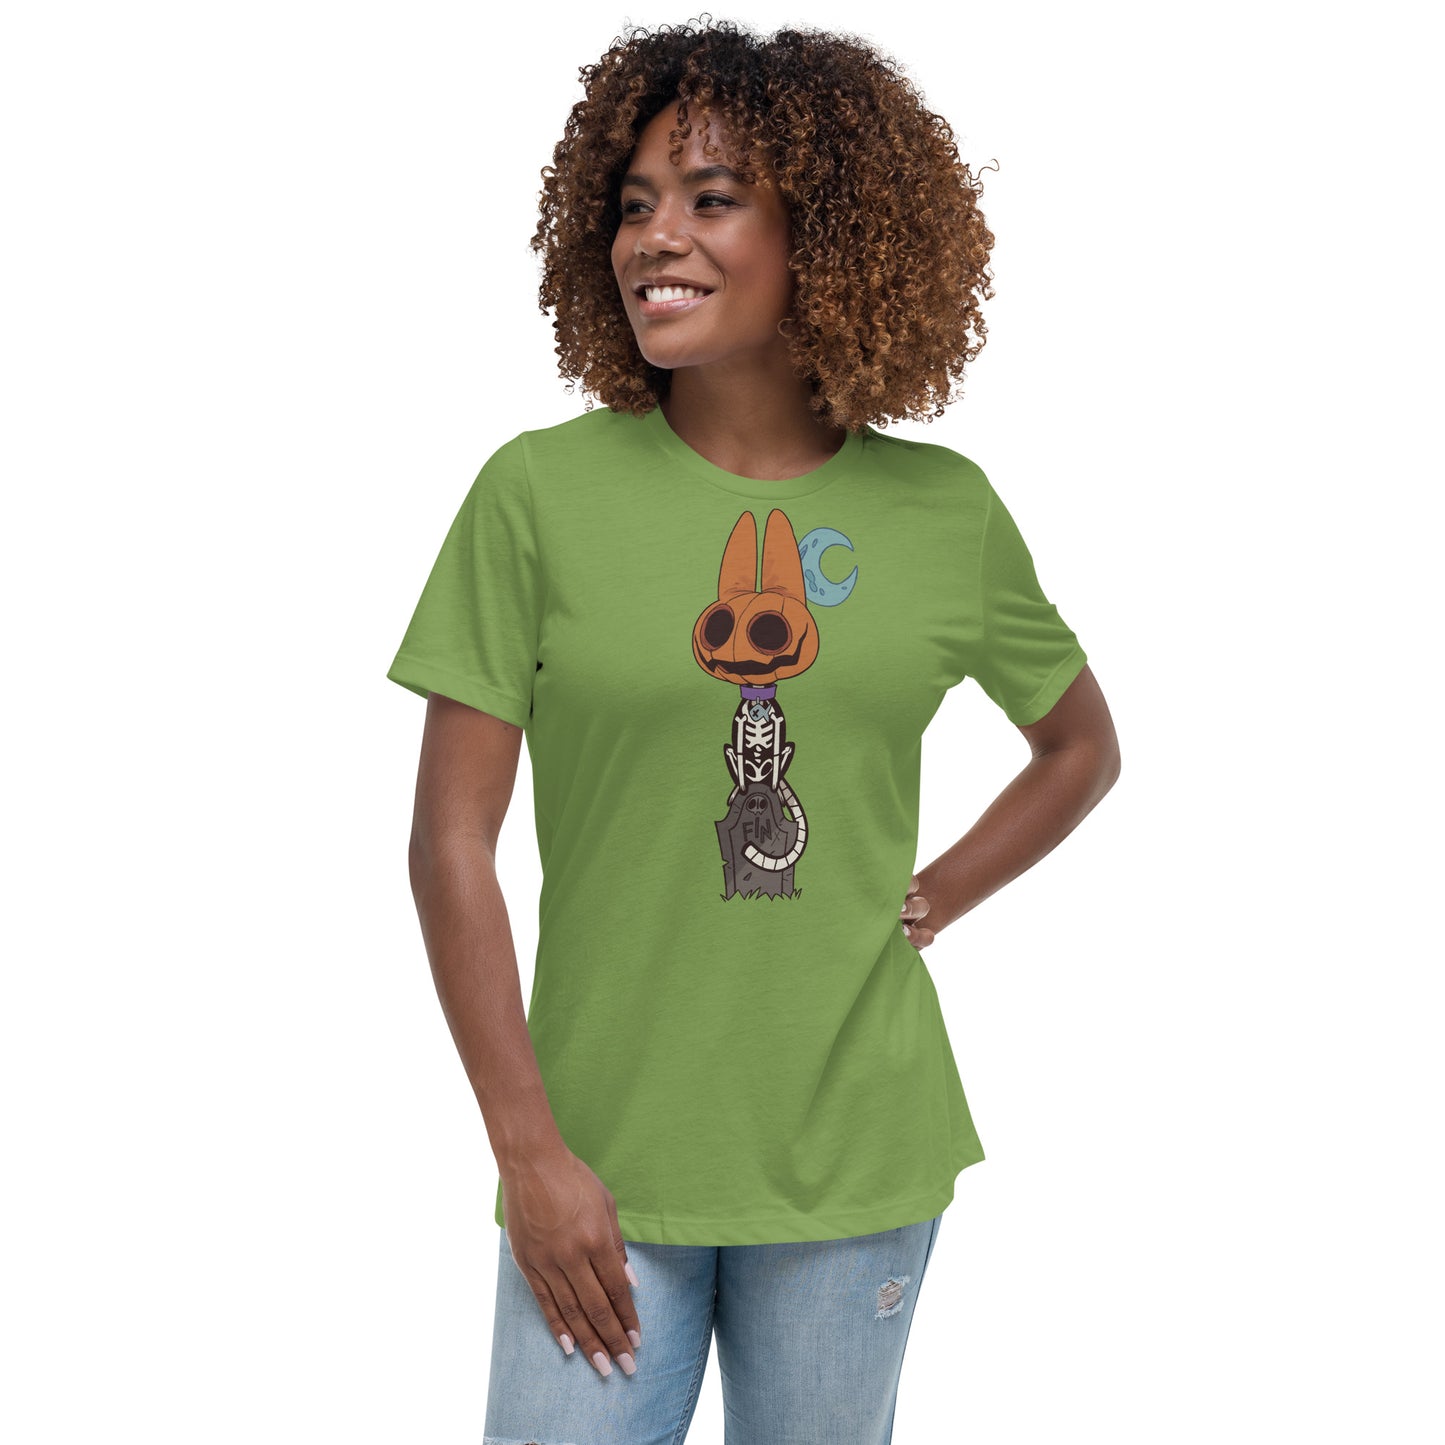 Finito on Grave Women's Relaxed T-Shirt